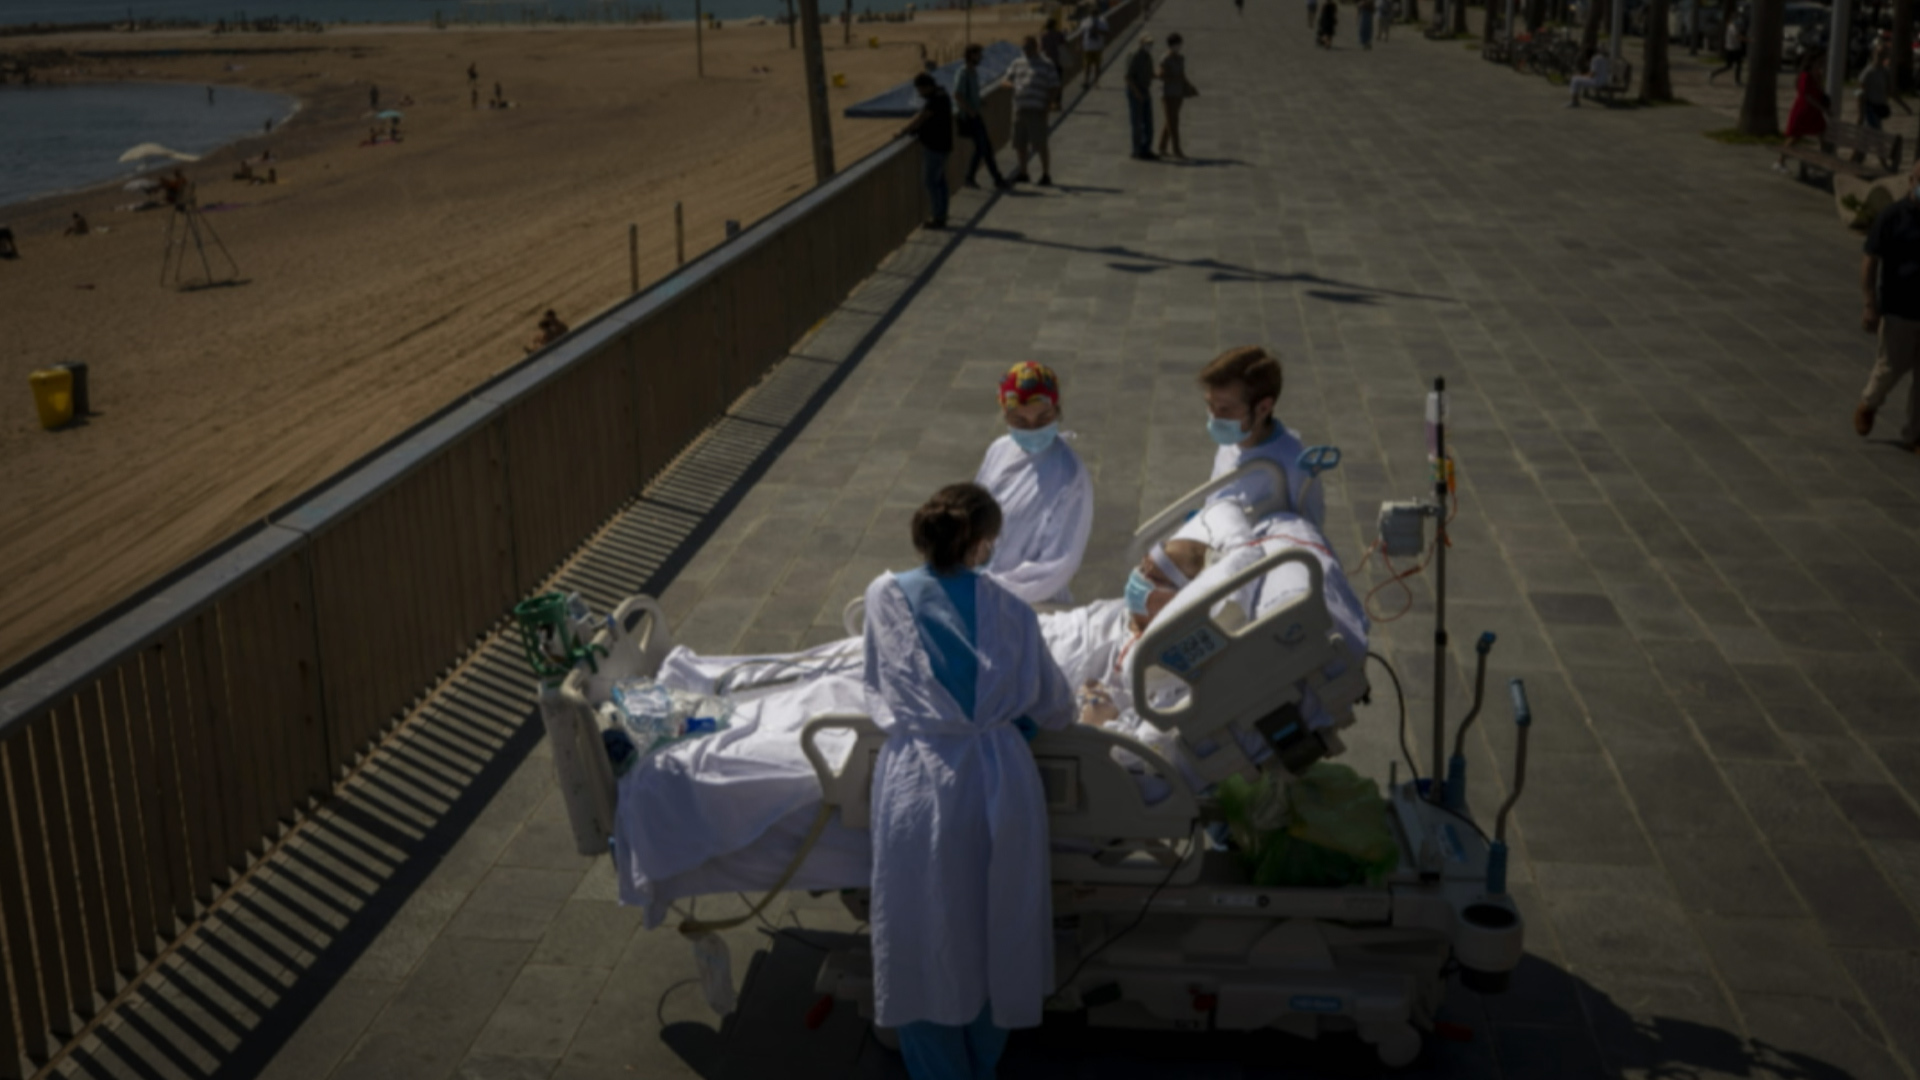 Francisco Espana, 60, is surrounded by members of his medical team as he looks at the Mediterranean sea from a promenade next to the “Hospital del Mar” in Barcelona, Spain, Friday, Sept. 4, 2020.